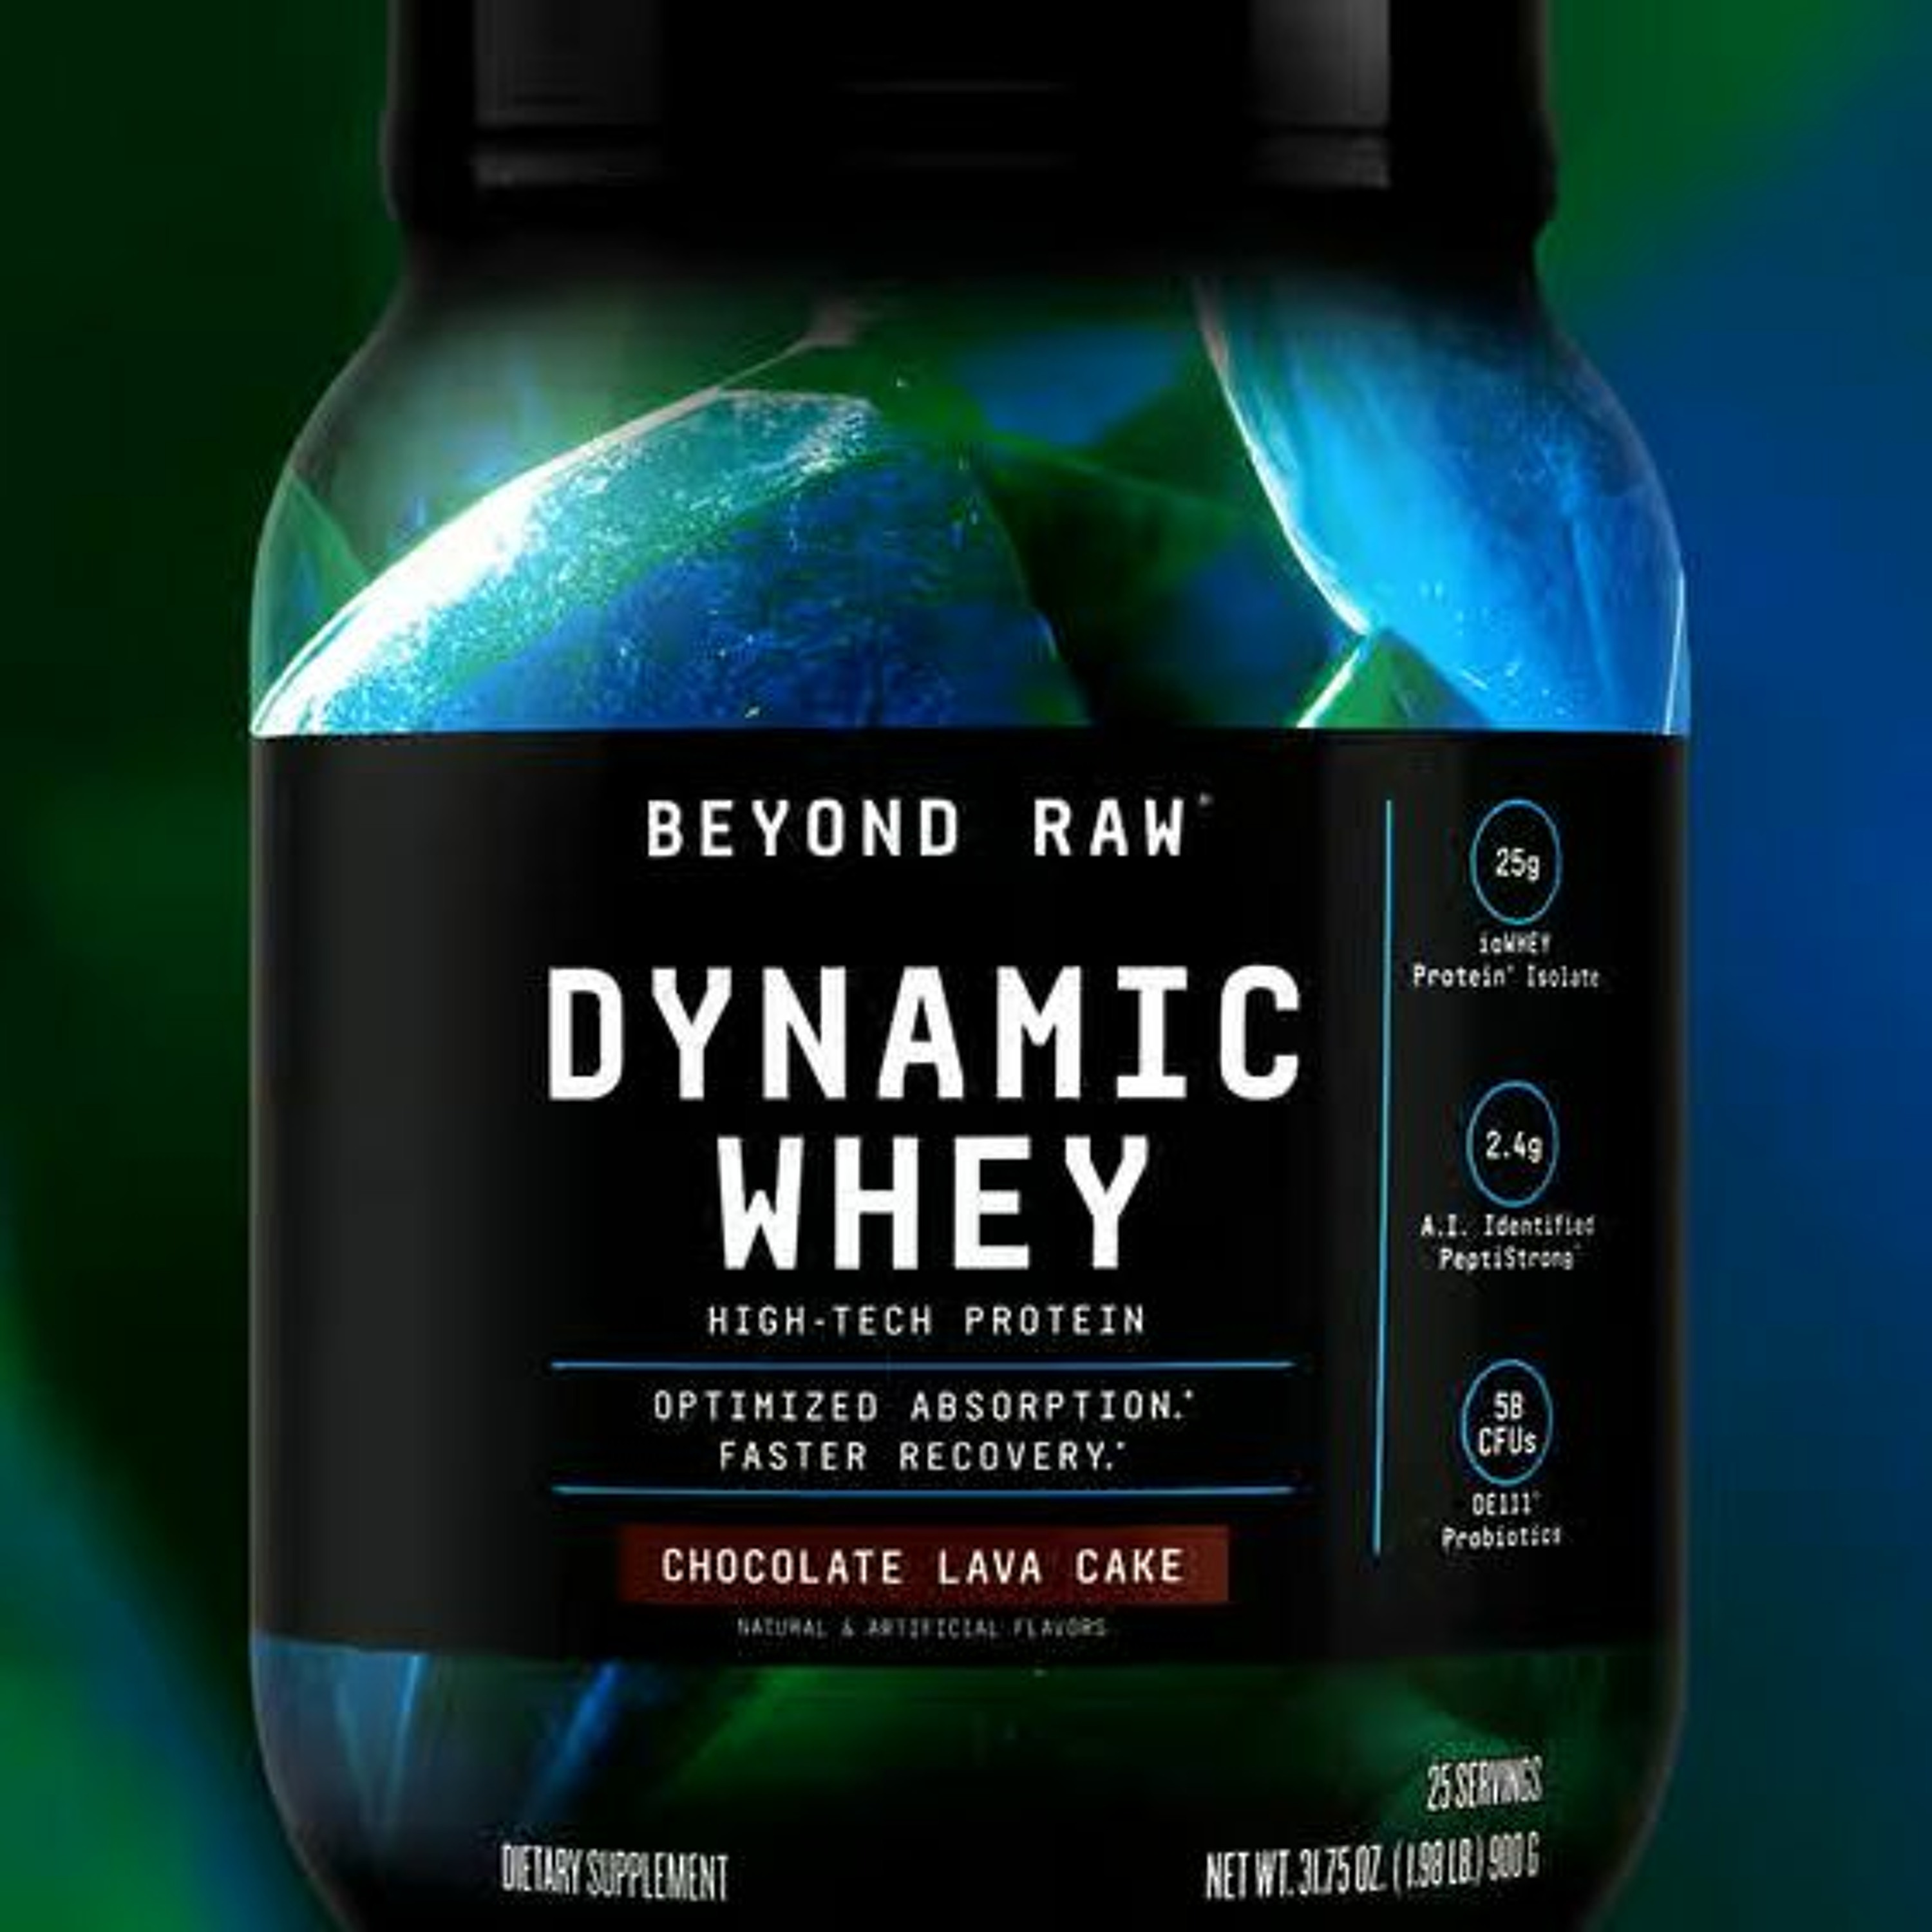 Beyond Raw utilizes superior ioWhey in its high-tech protein powder and mass gainer